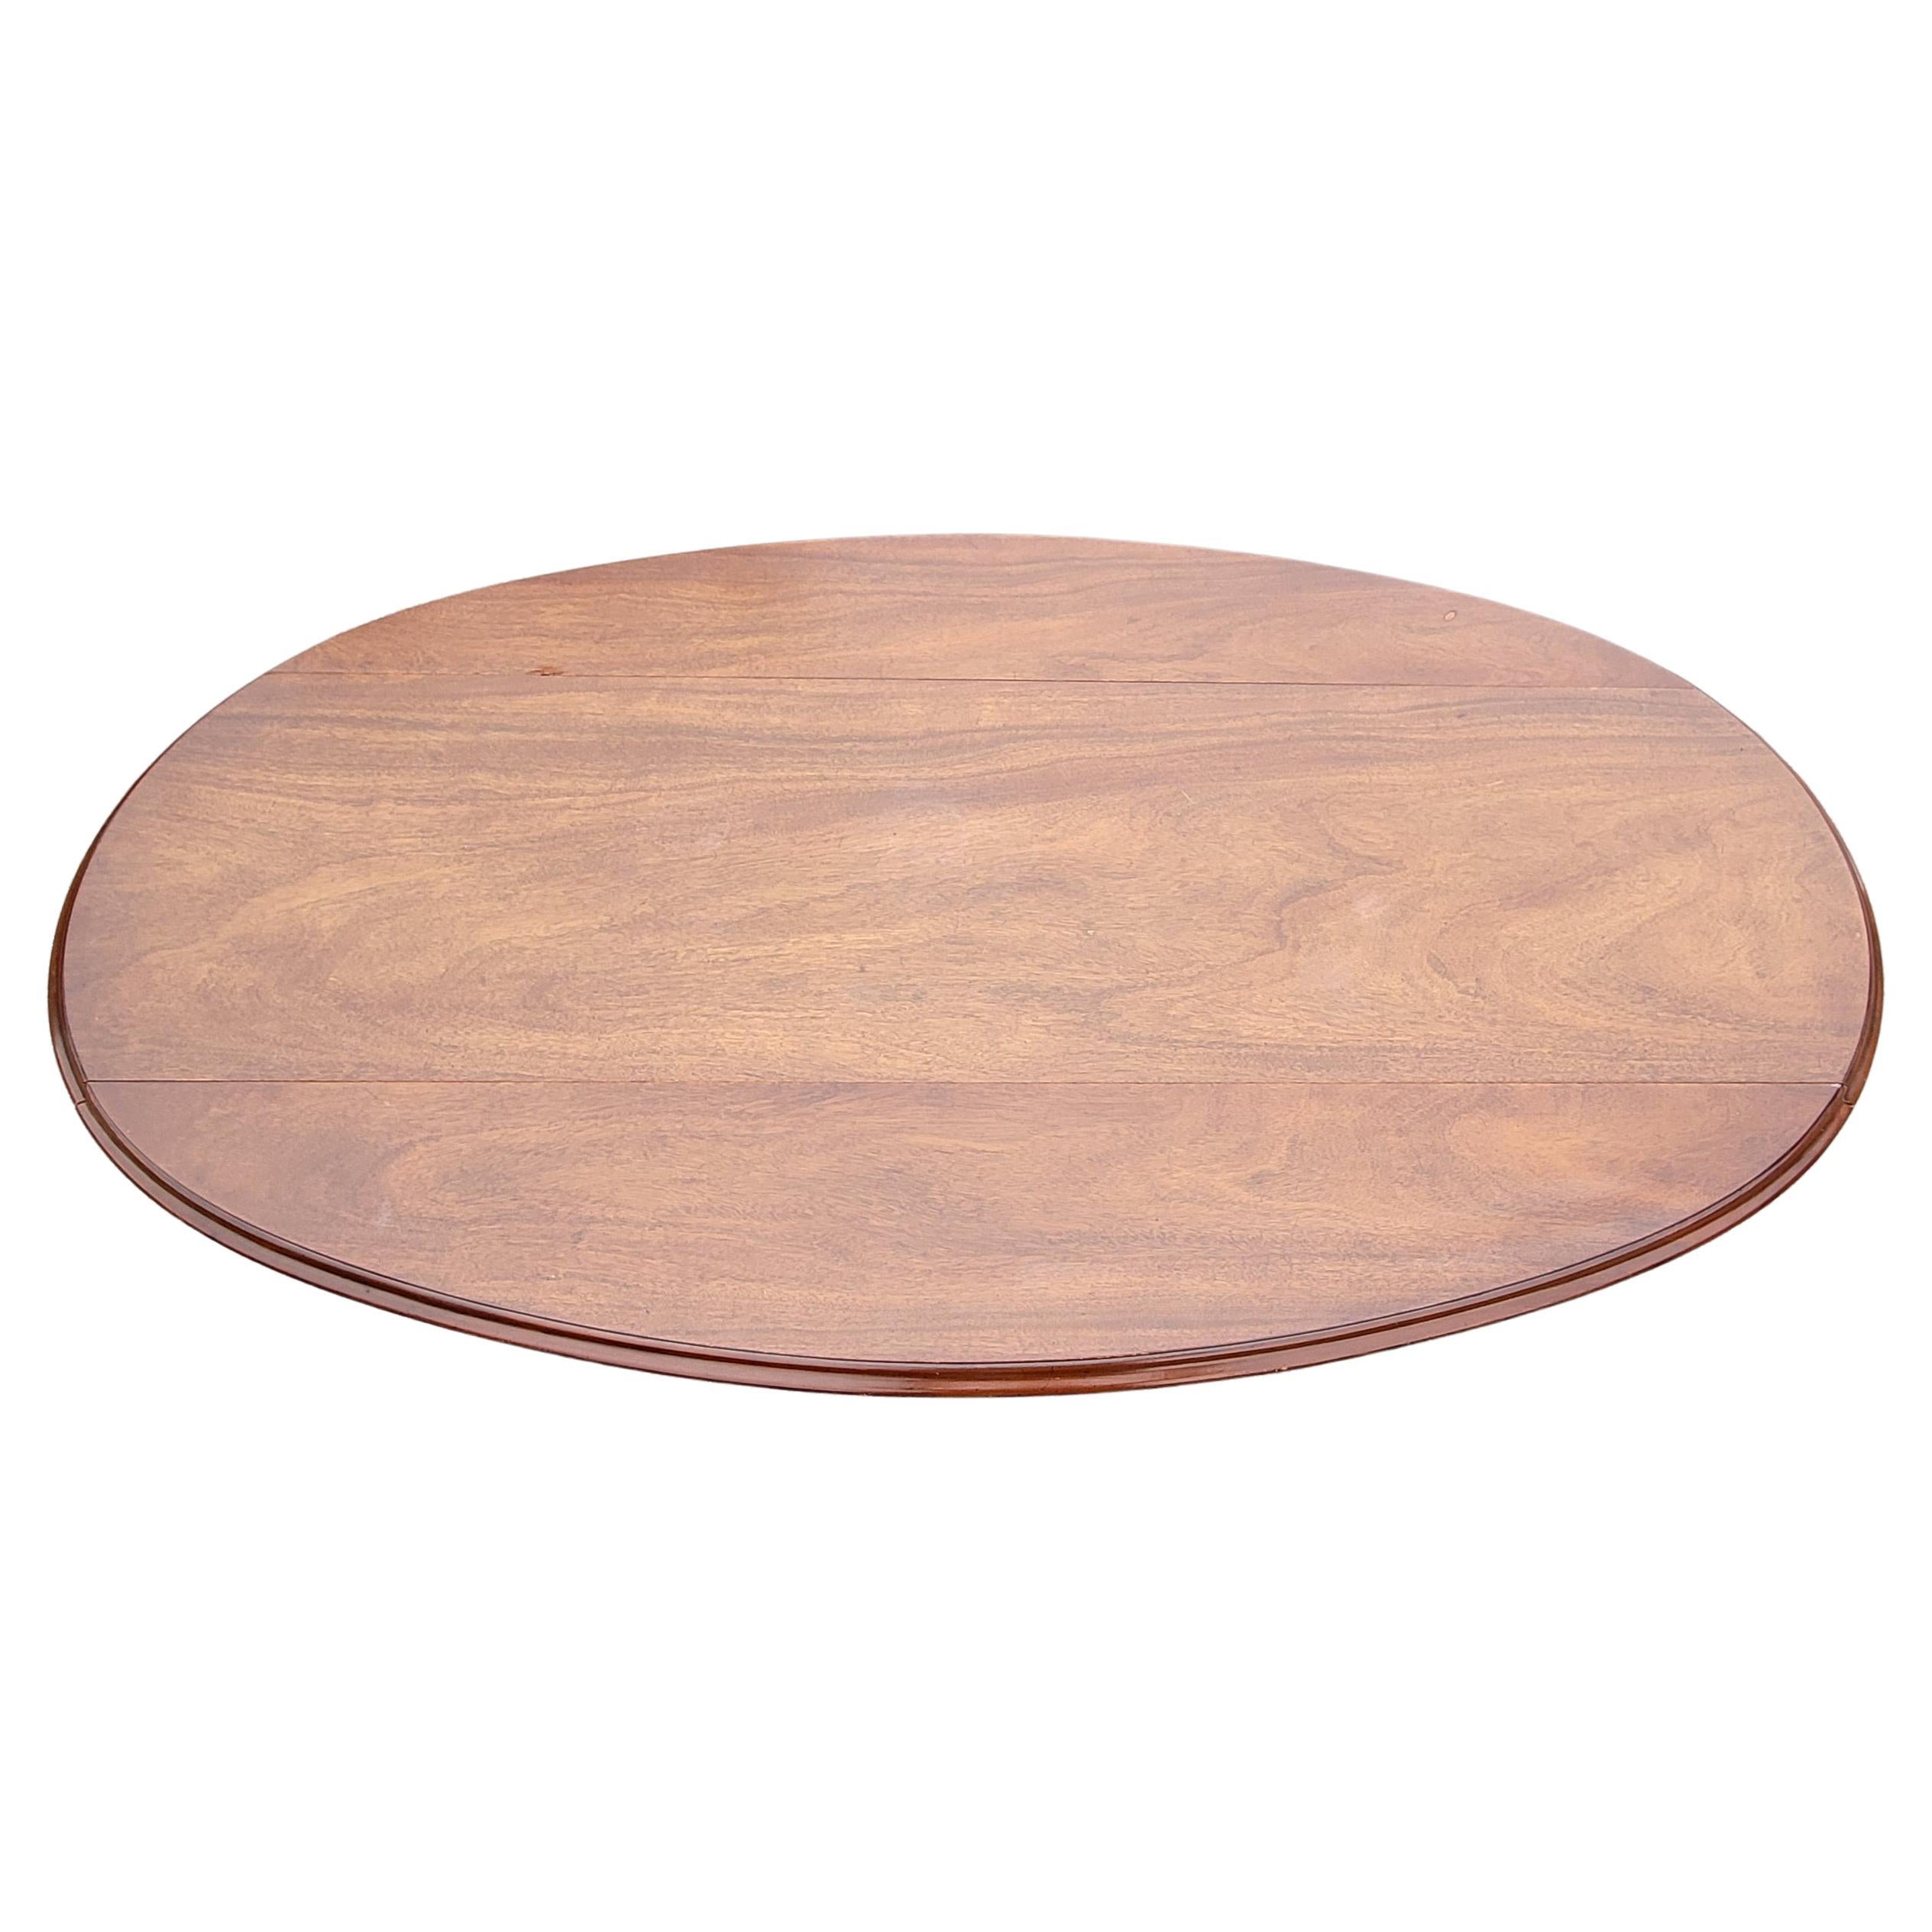 A Morganton Tidewater Collection large oval pure mahogany dropleaf cocktail table with Queen Anne style feet. Measures 60